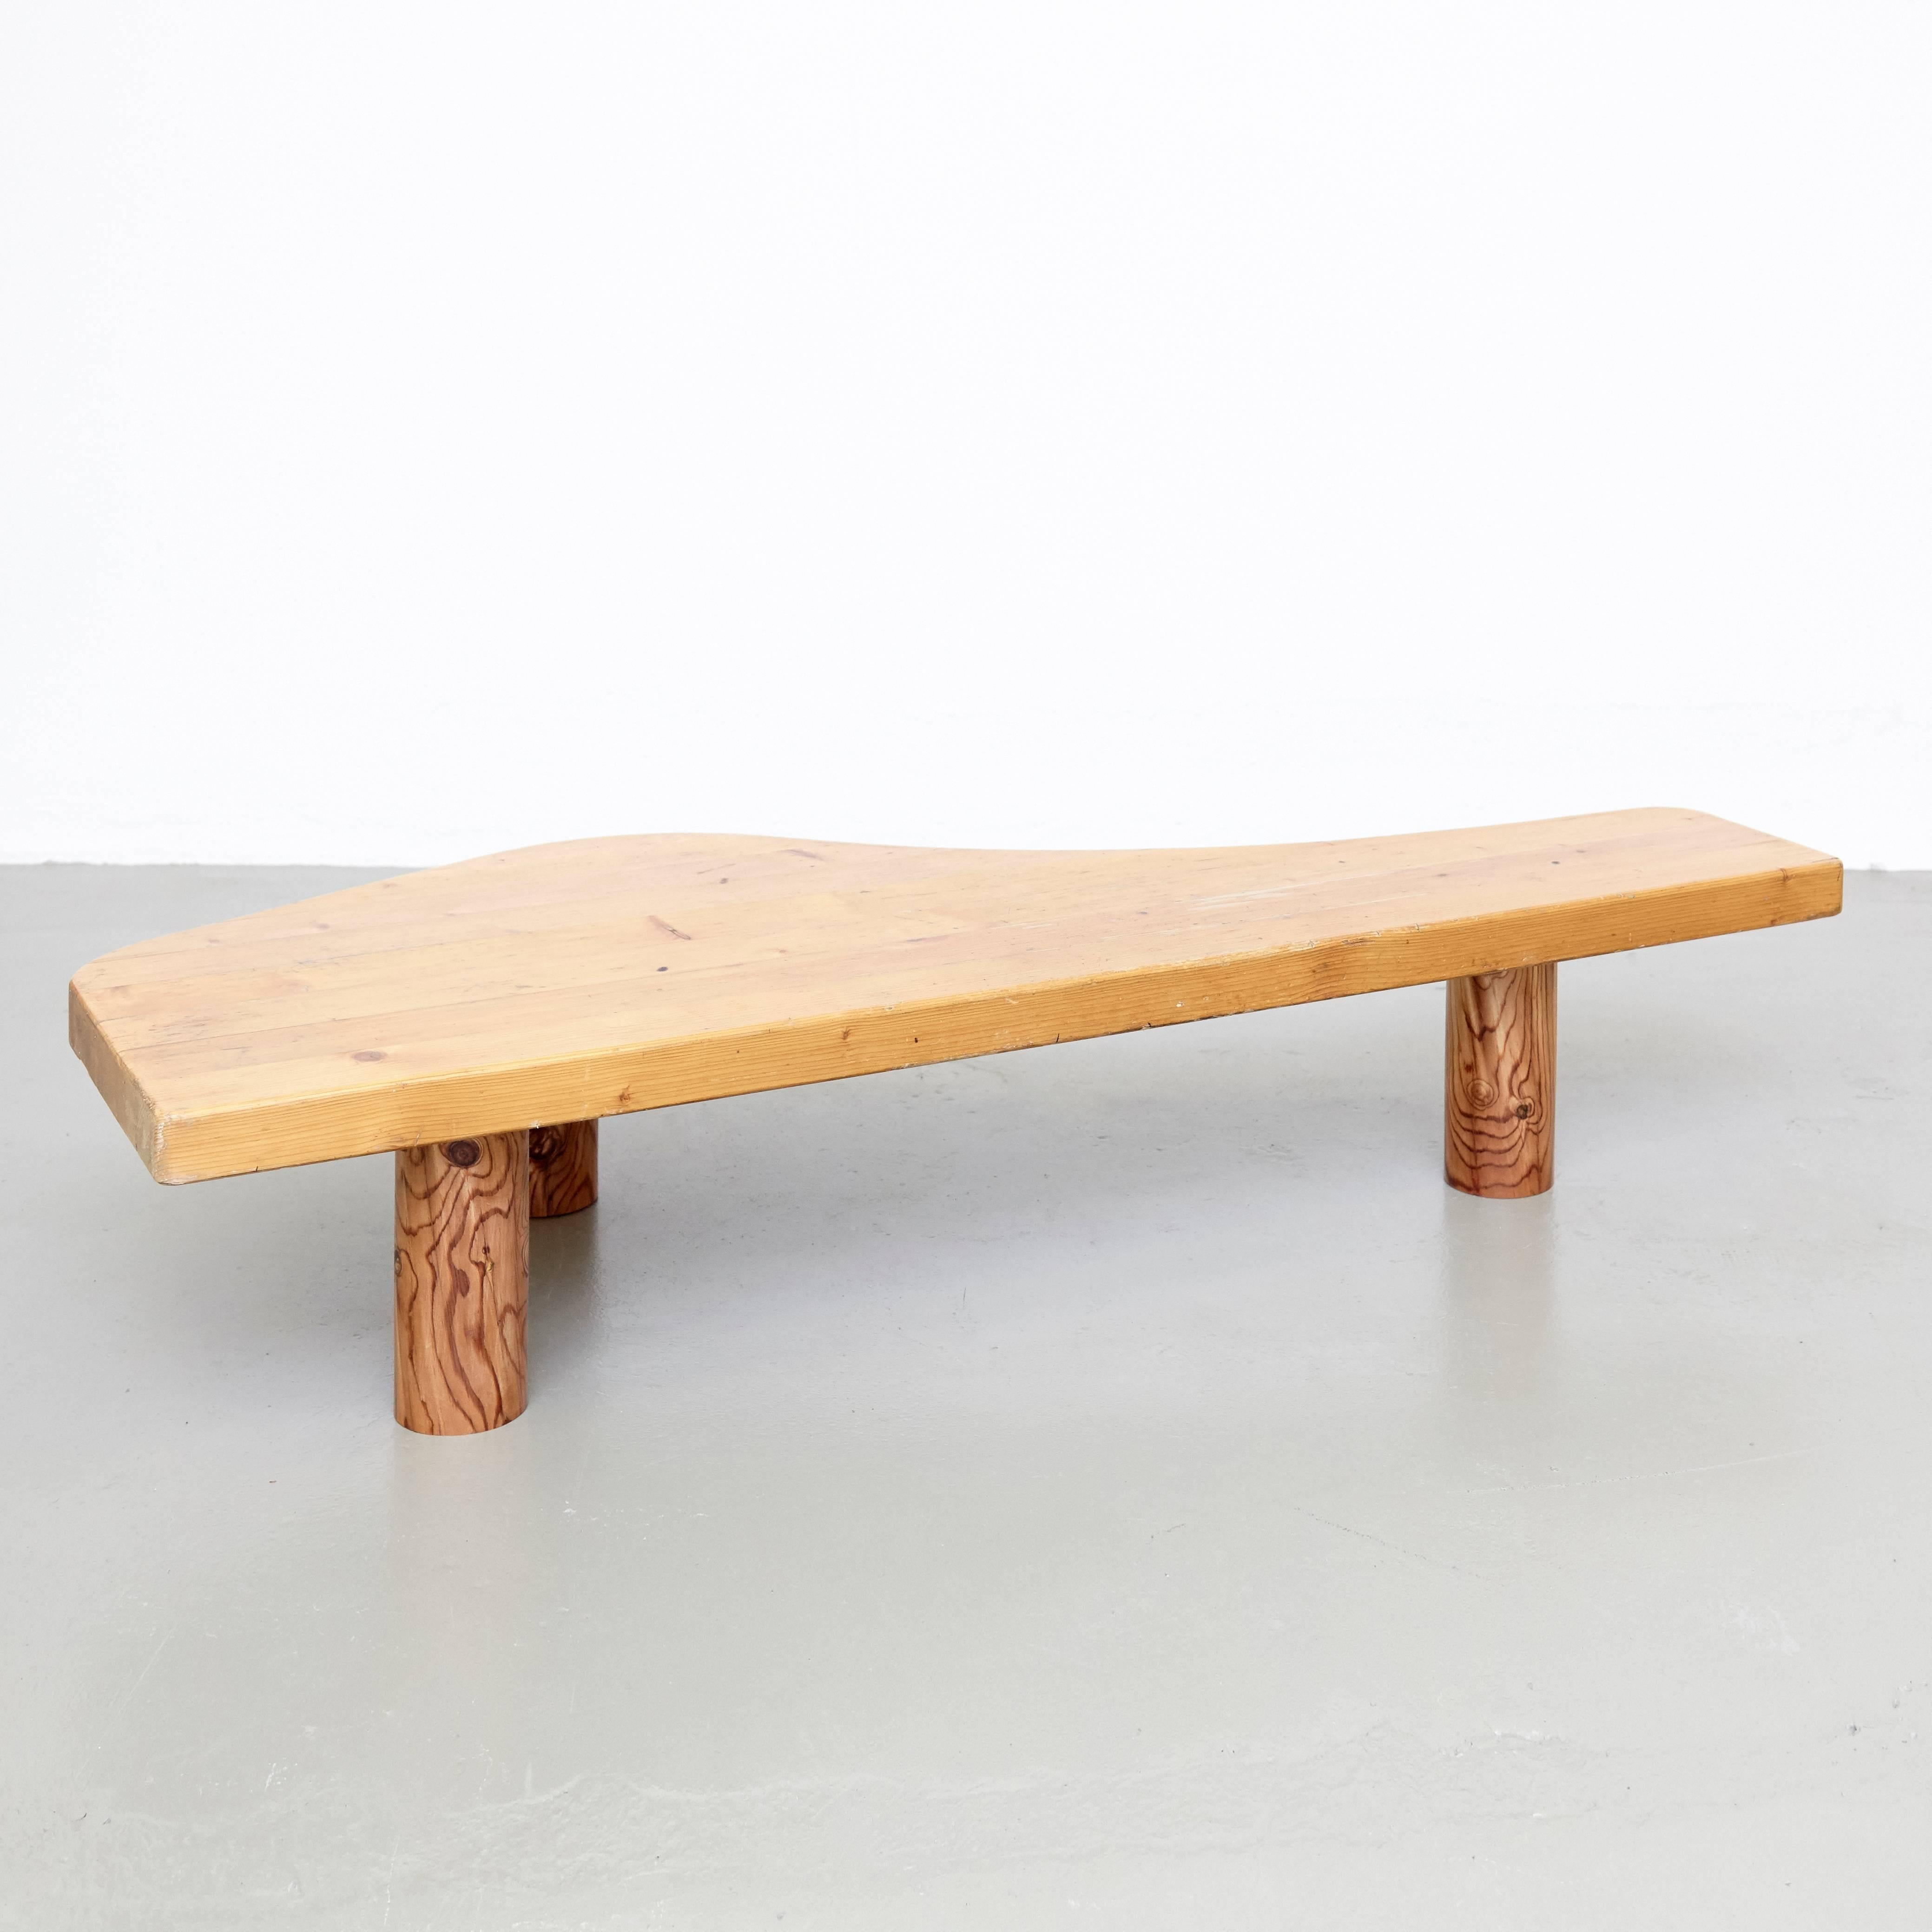 French Charlotte Perriand Style Free-Form Low Table, circa 1970